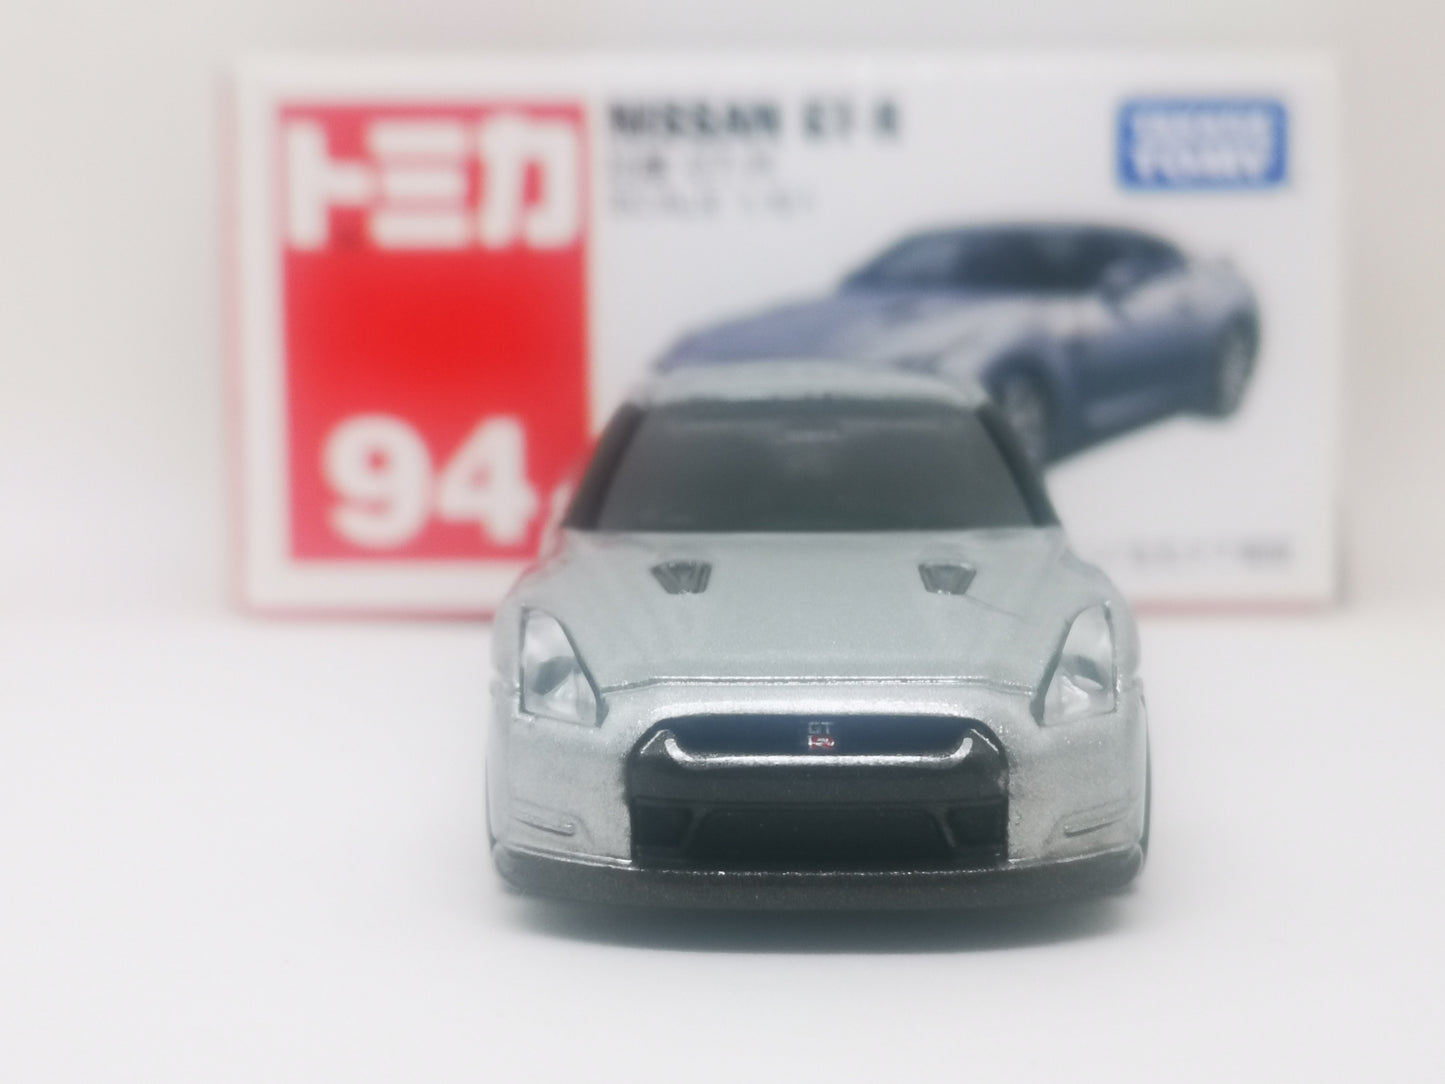 Tomica #94 Nissan GT-R 1:61 Scale